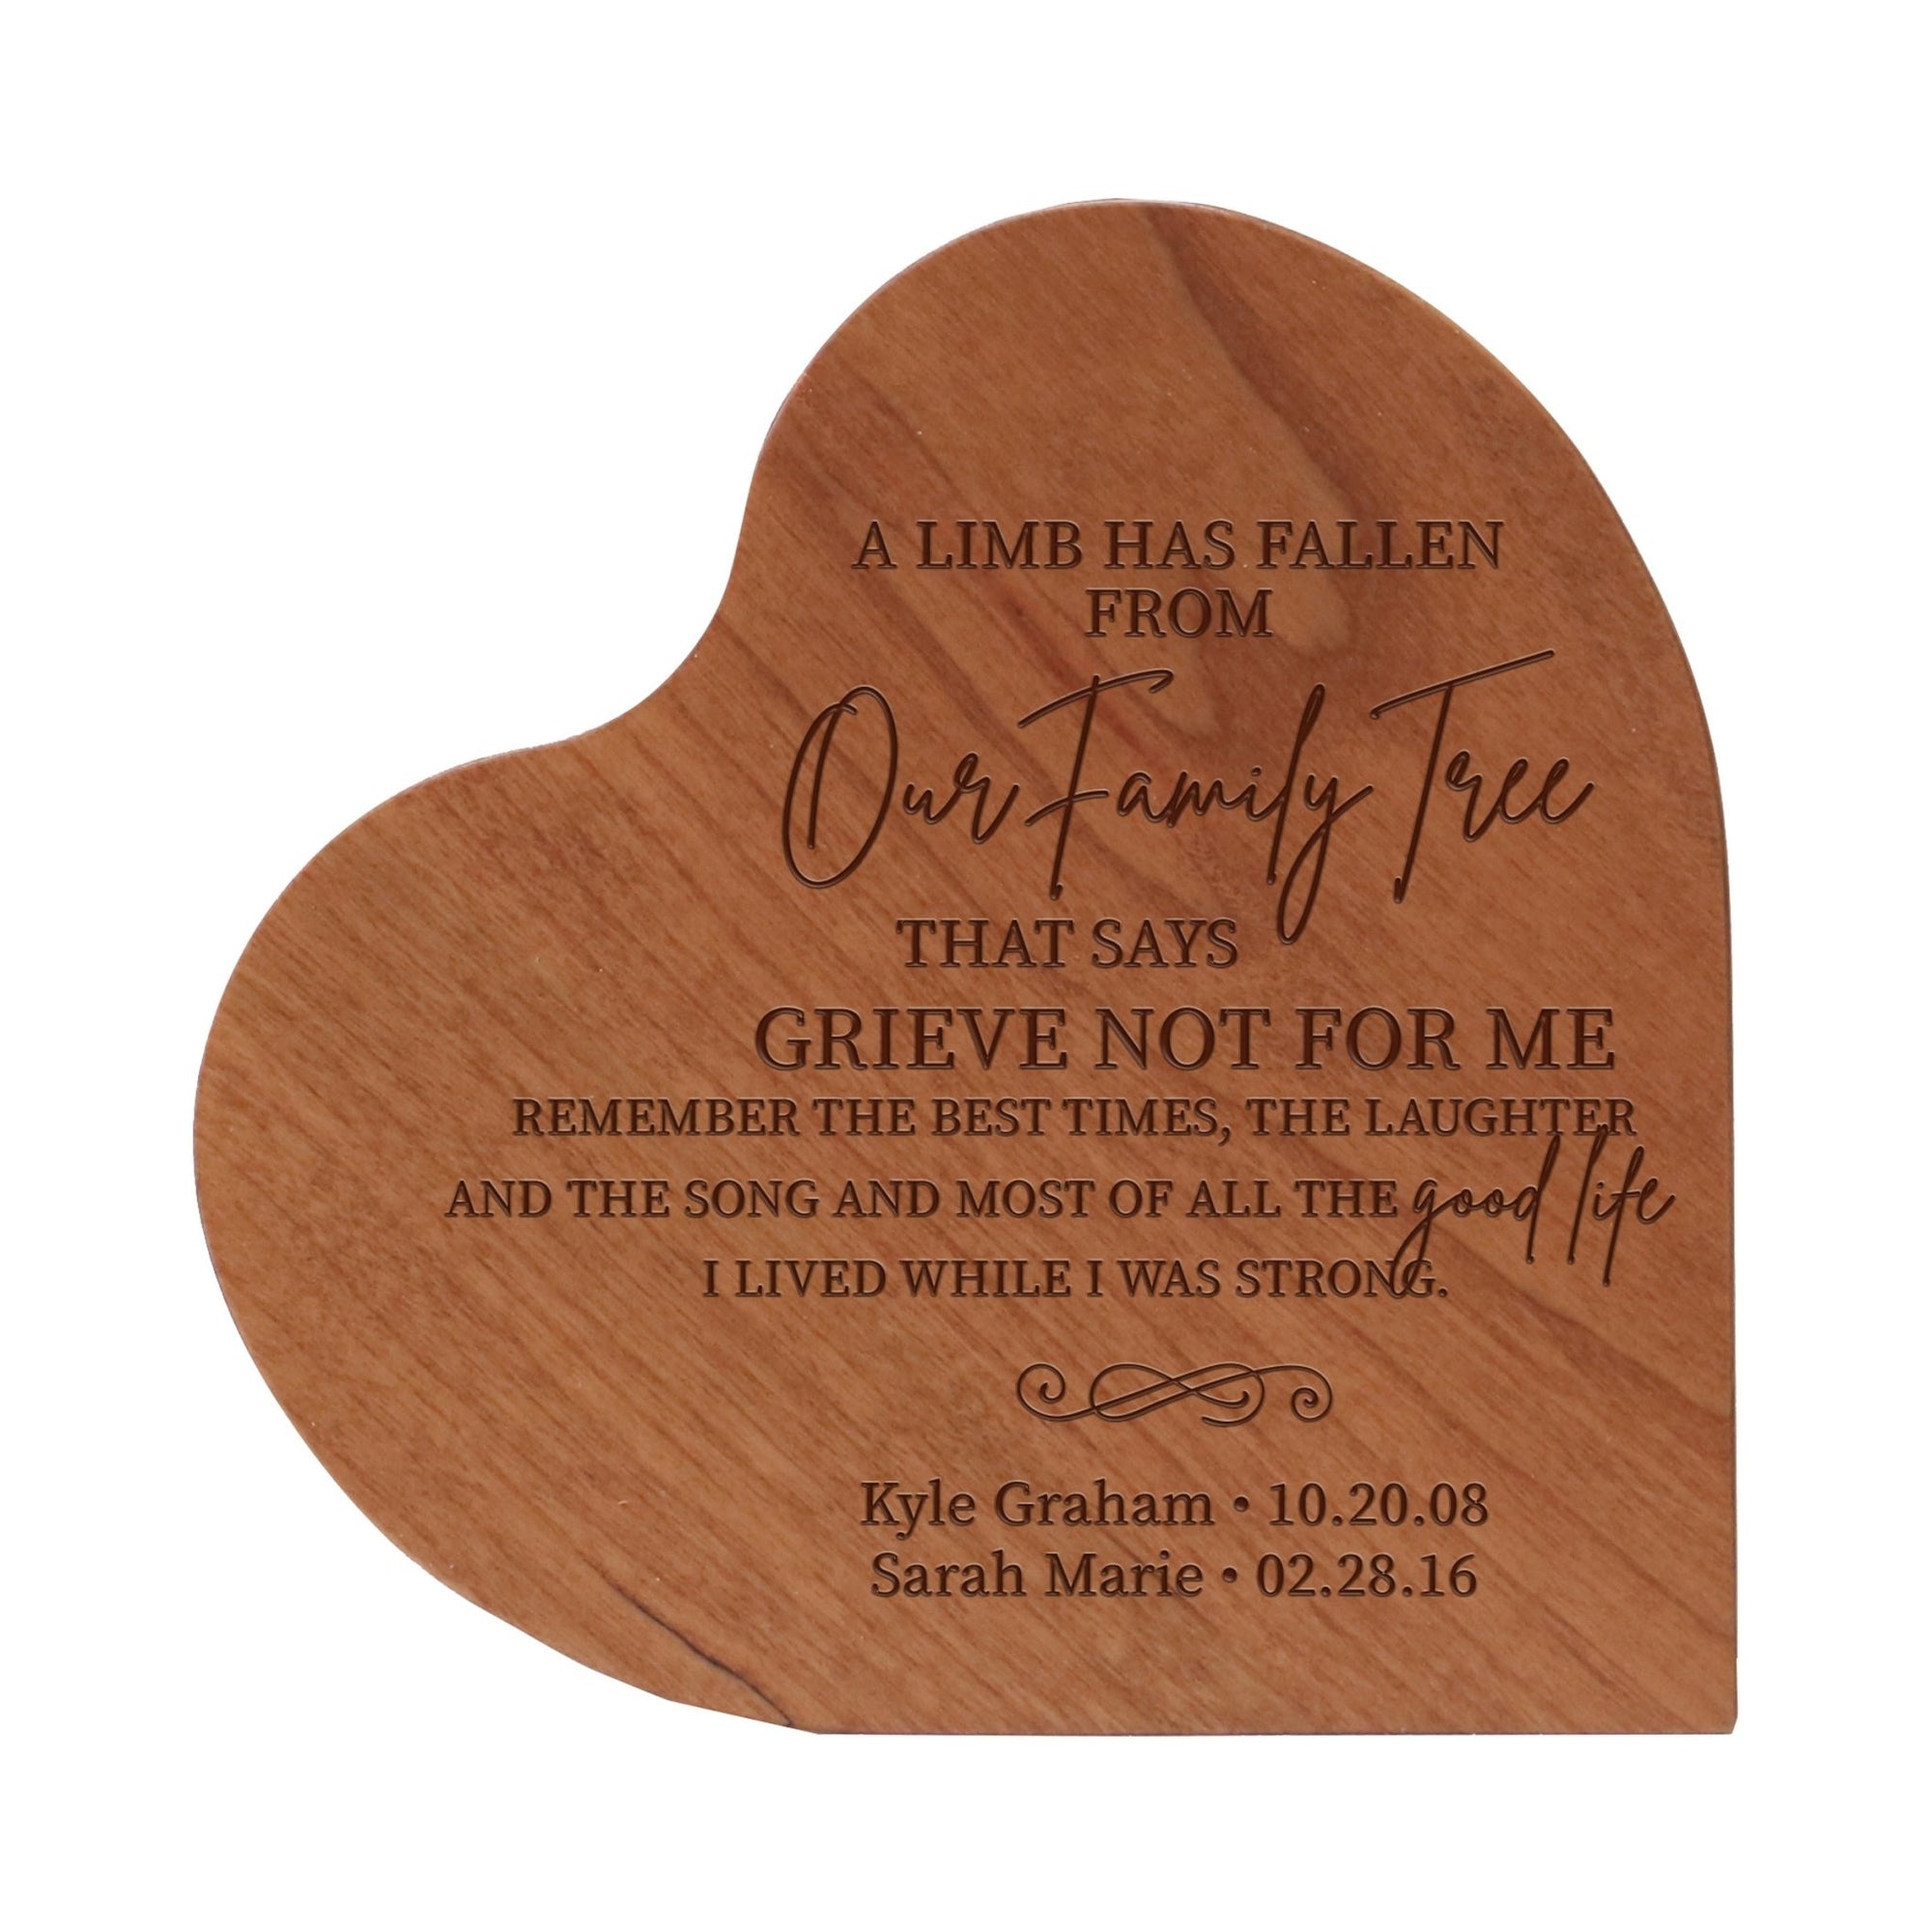 Personalized Small Heart Cremation Urn Keepsake For Human Ashes A Limb Has Fallen - LifeSong Milestones